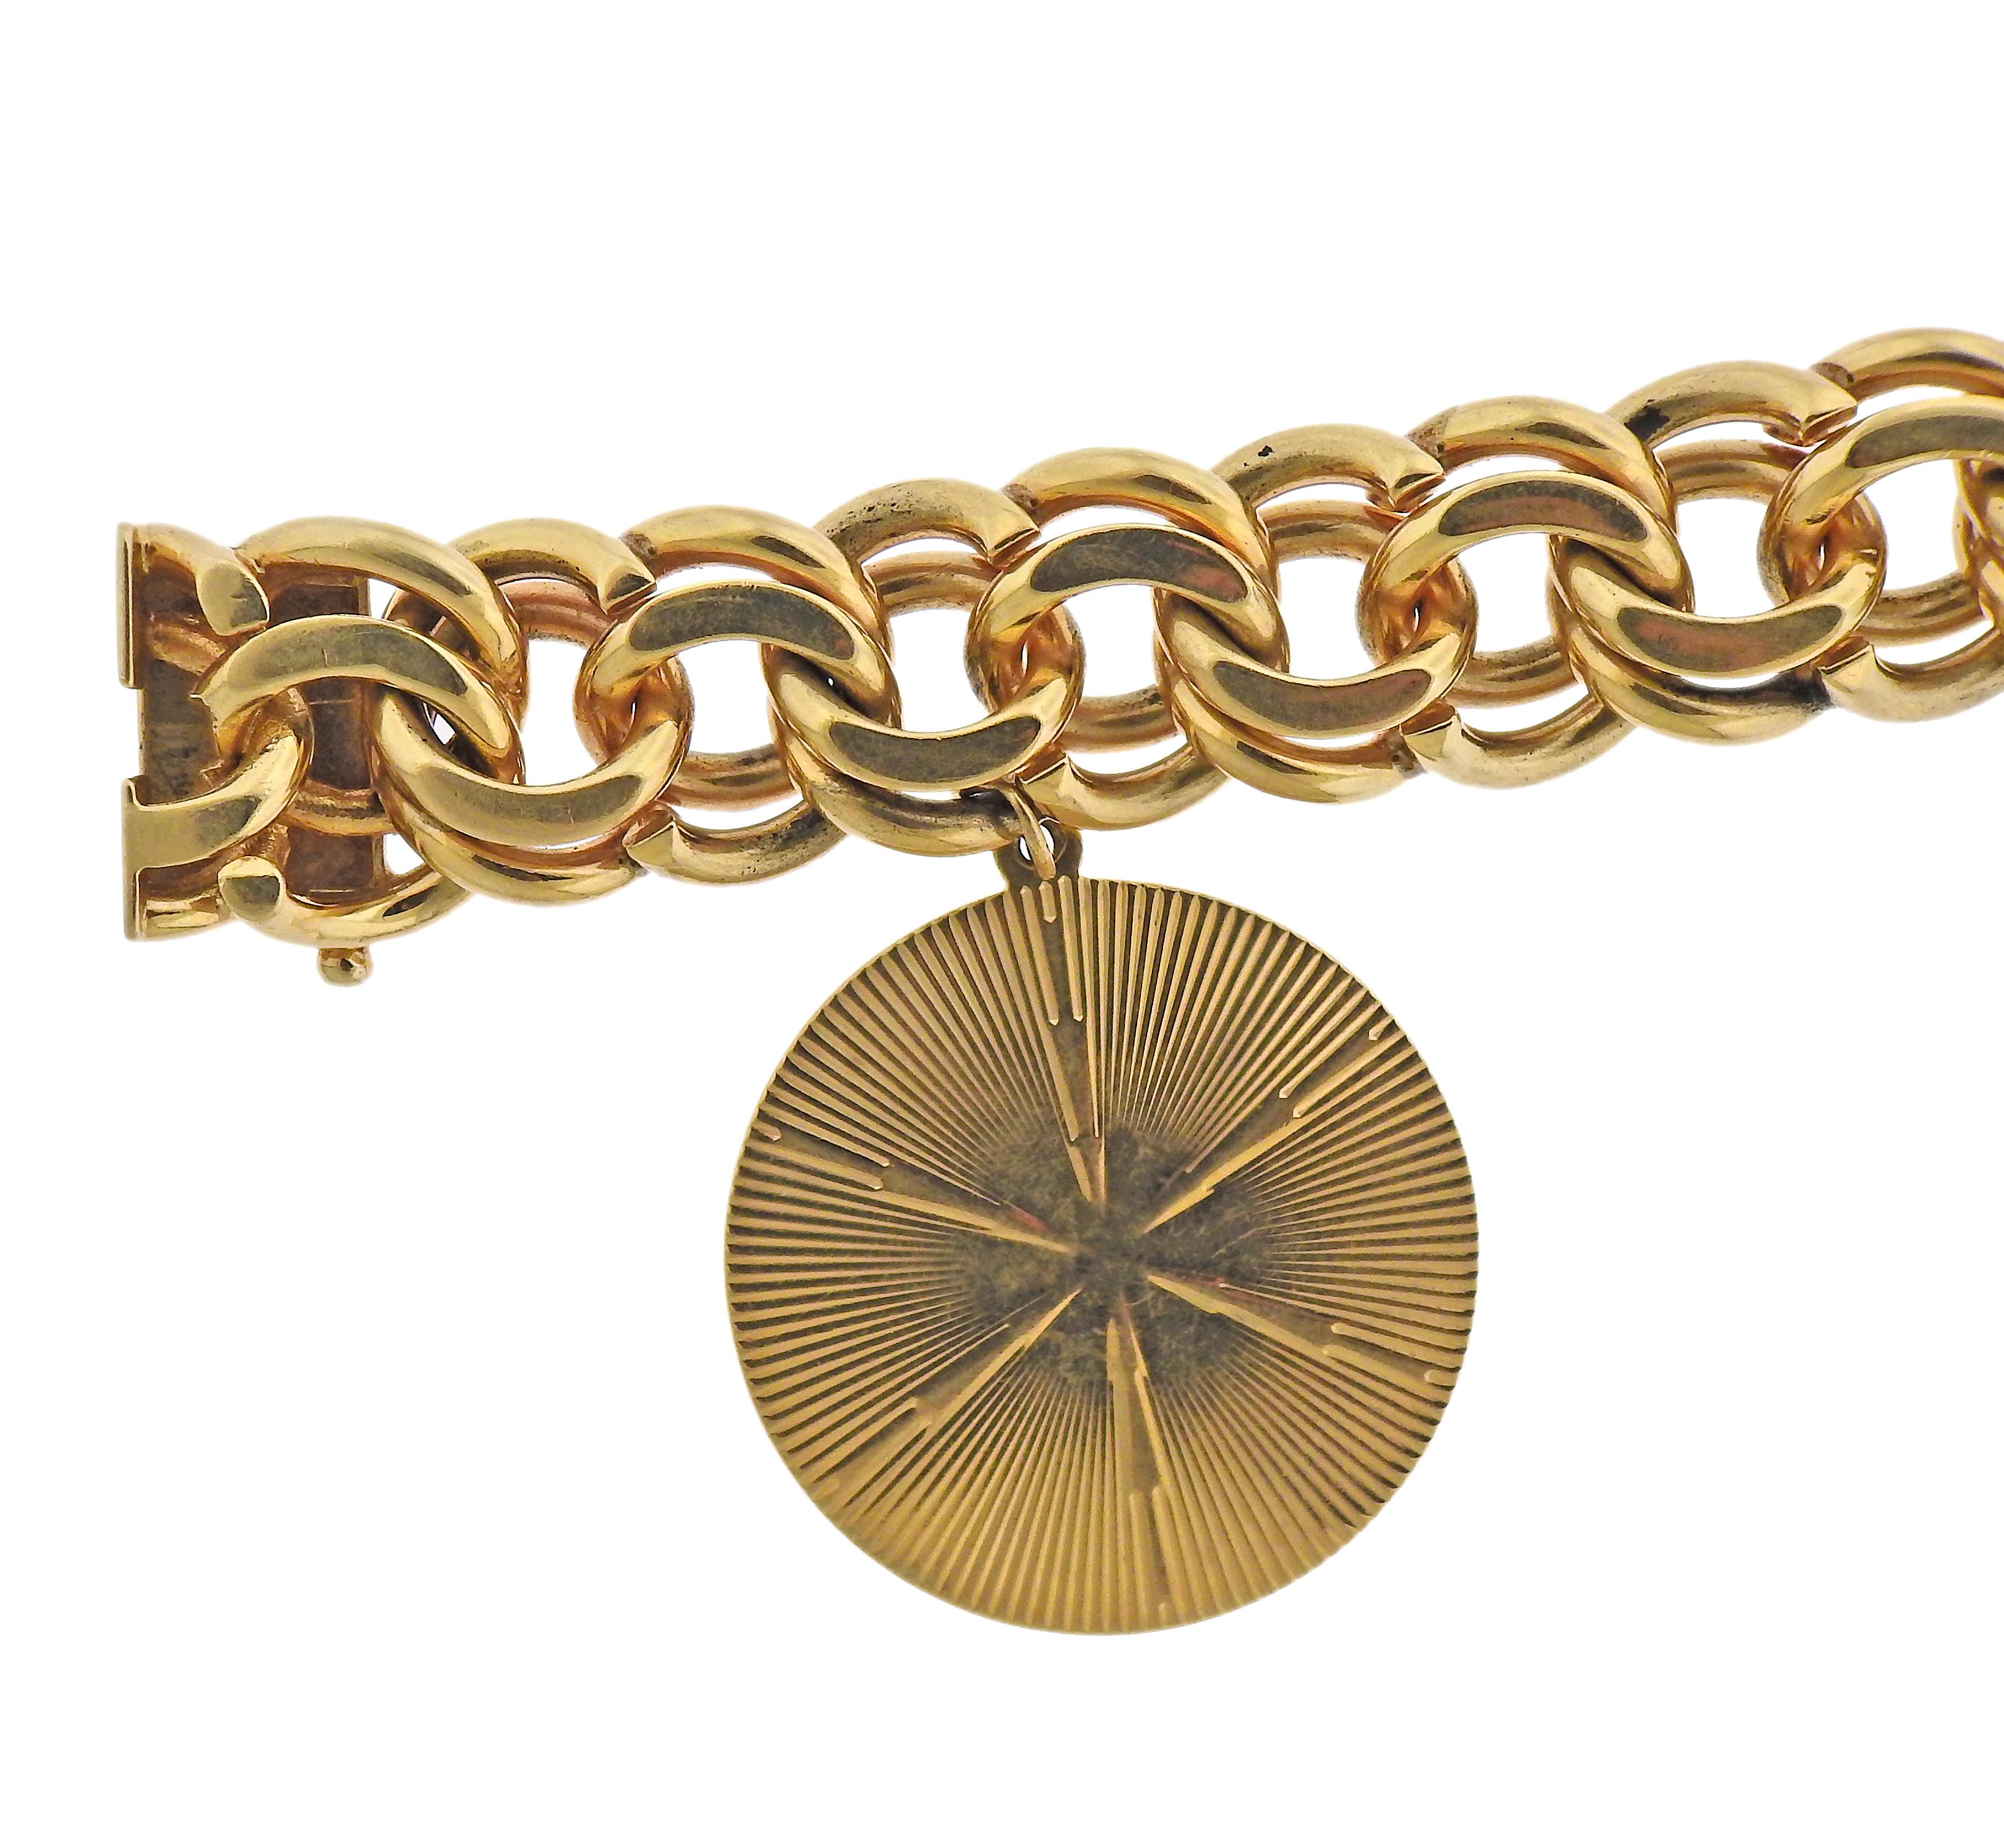 Chunky and substantial 14k gold Mid century bracelet by Tiffany & Co, with a T & Co 4k gold medallion charm. Both pieces marked Tiffany & Co, 14k. Medallion engraved 